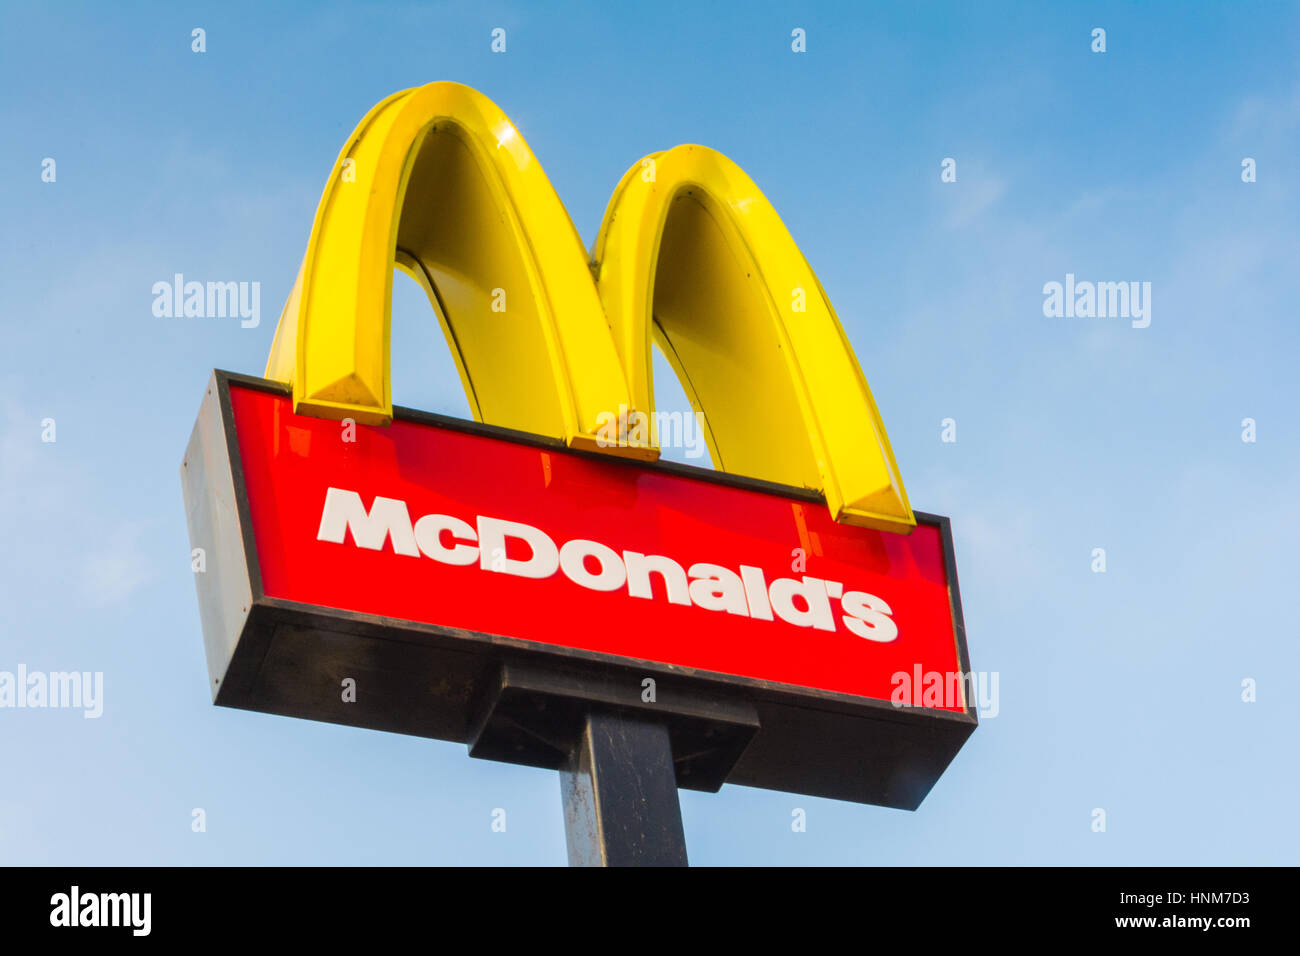 Mcdonalds Logo High Resolution Stock Photography and Images - Alamy